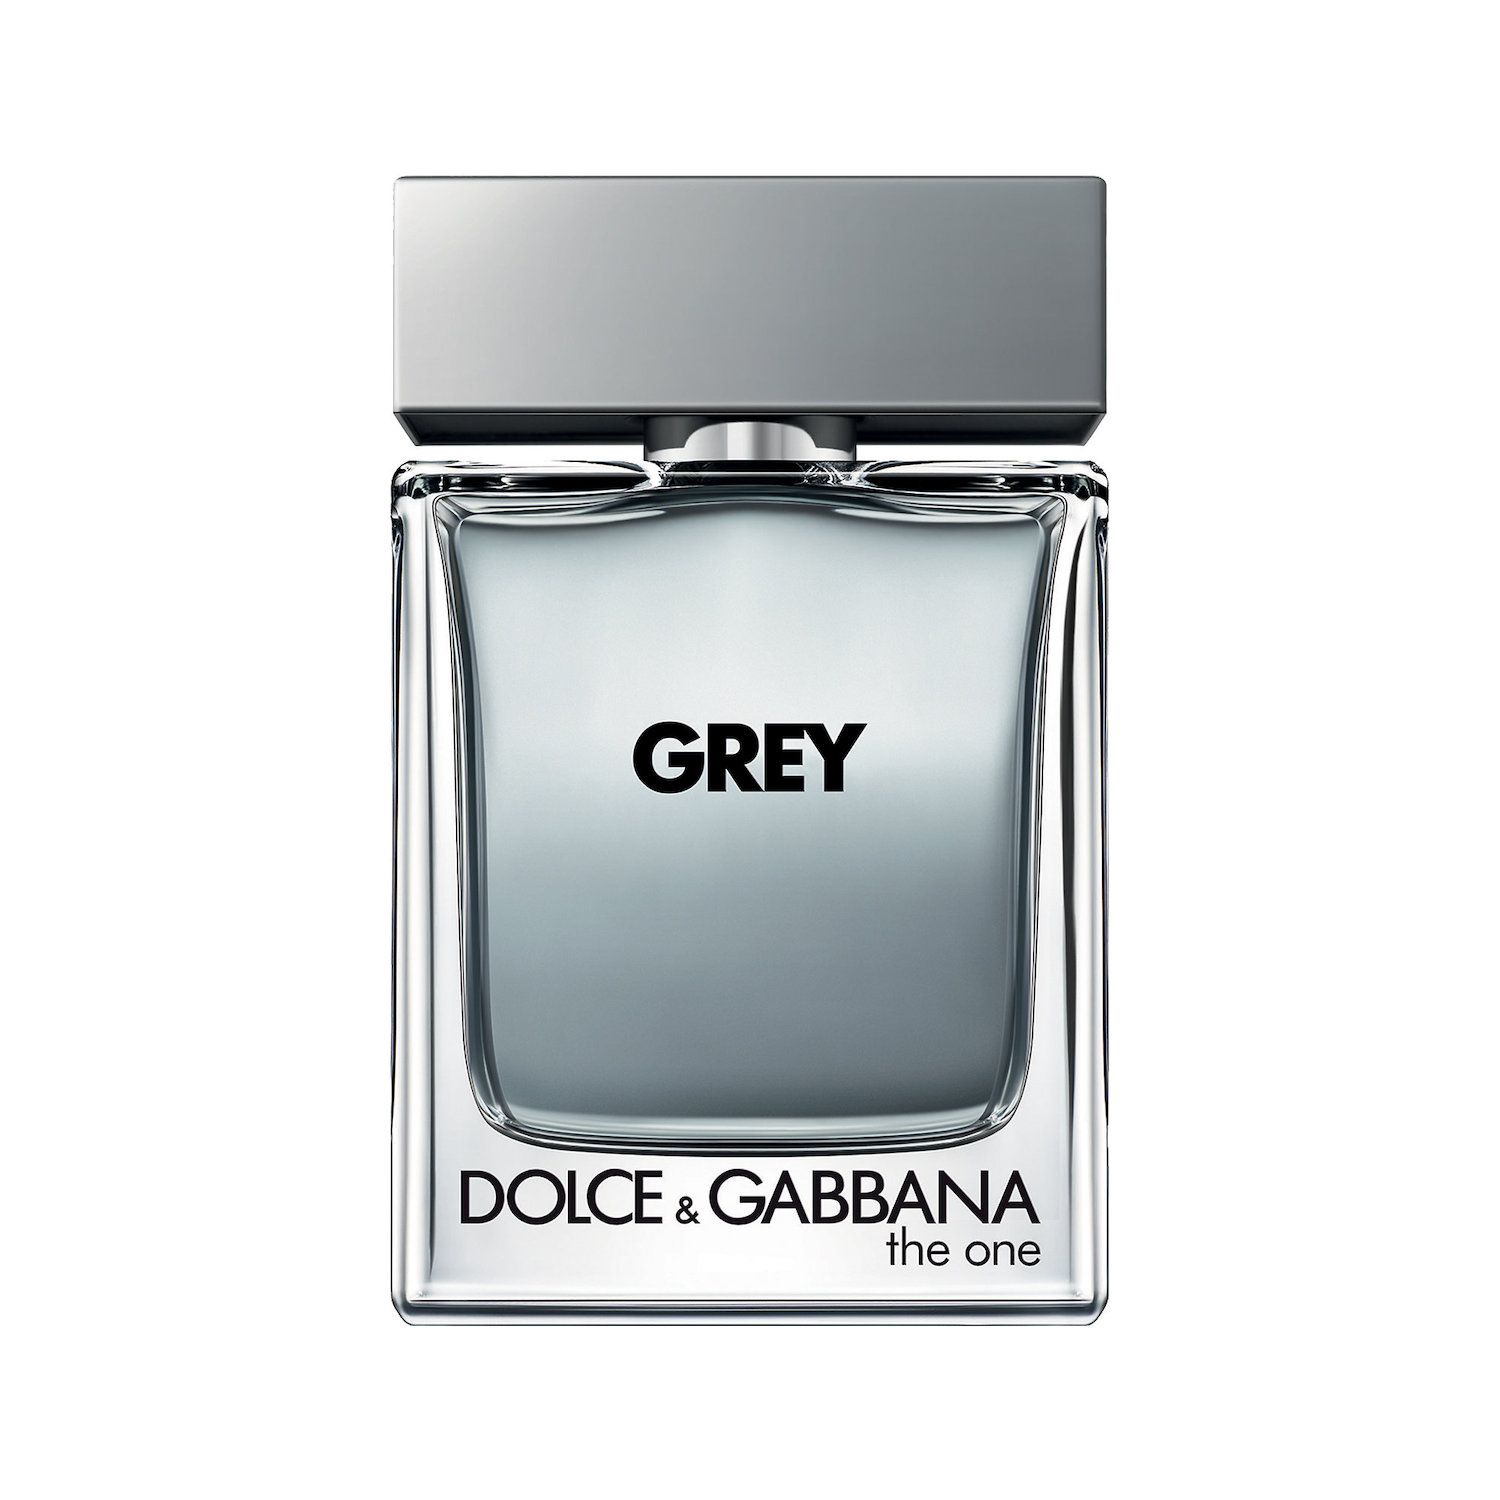 dolce and gabbana the one kohls